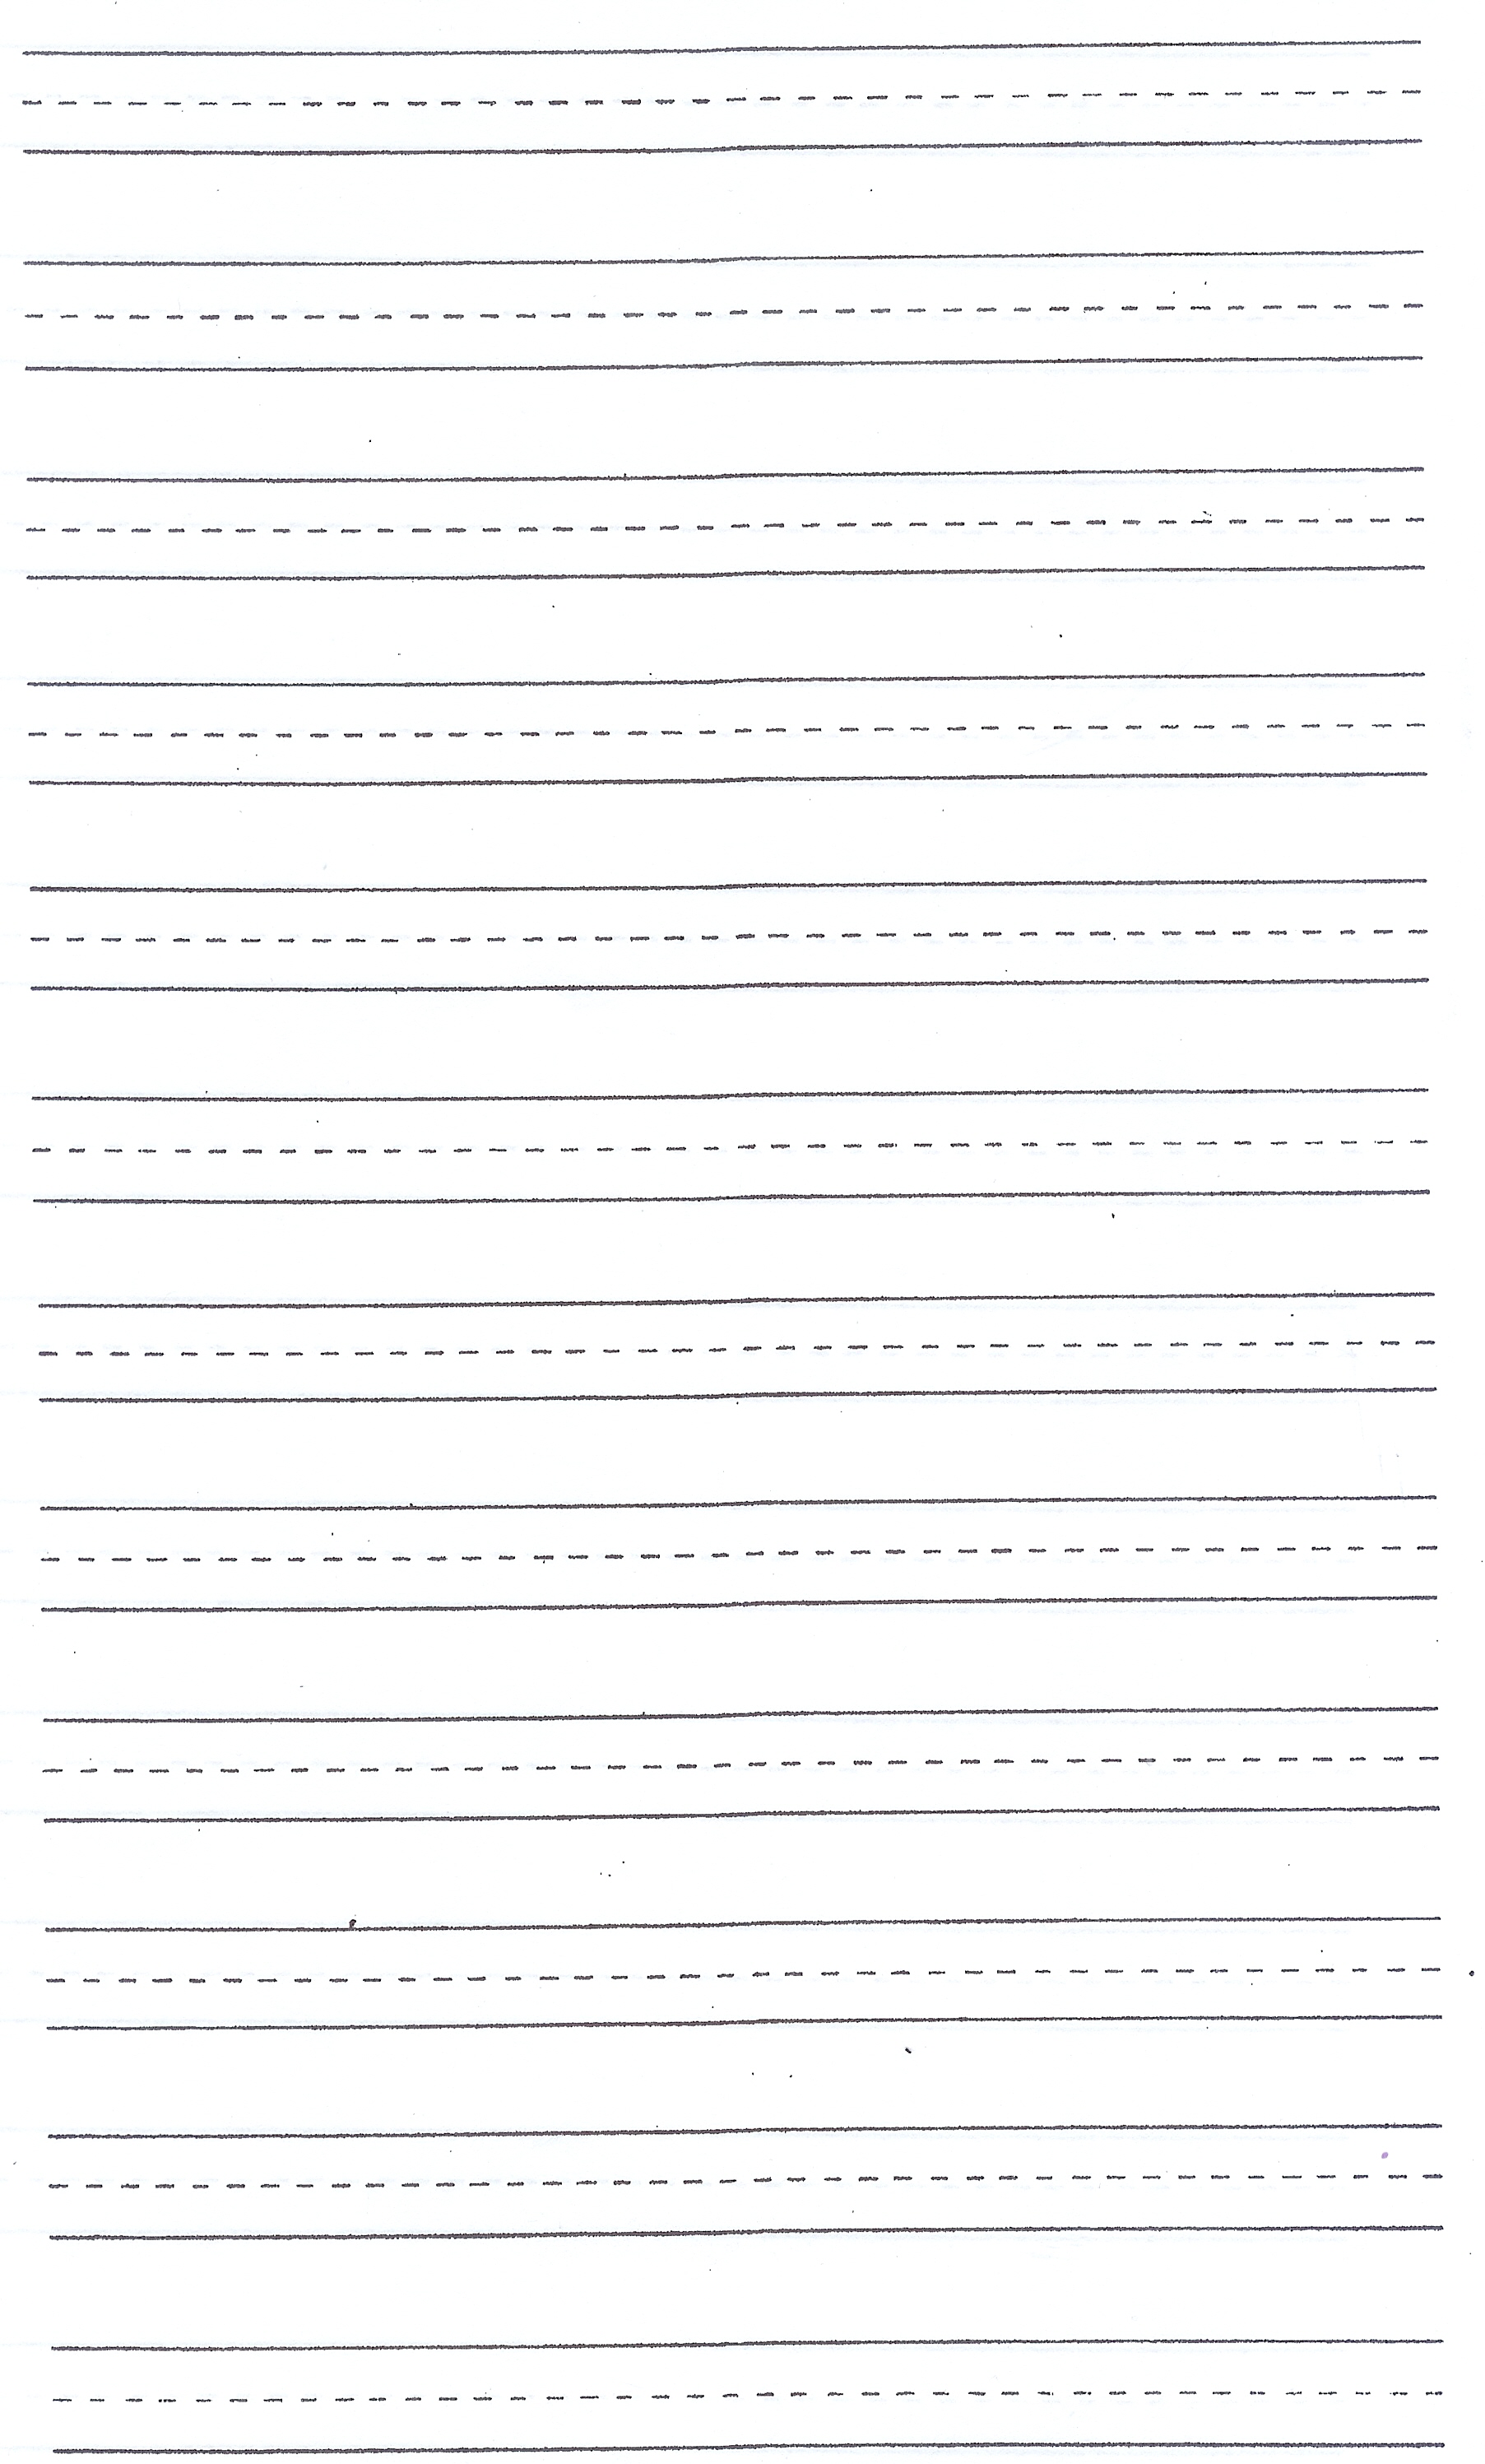 free-writing-paper-for-first-grade-writing-service-paper-templates-with-drawing-space-letter